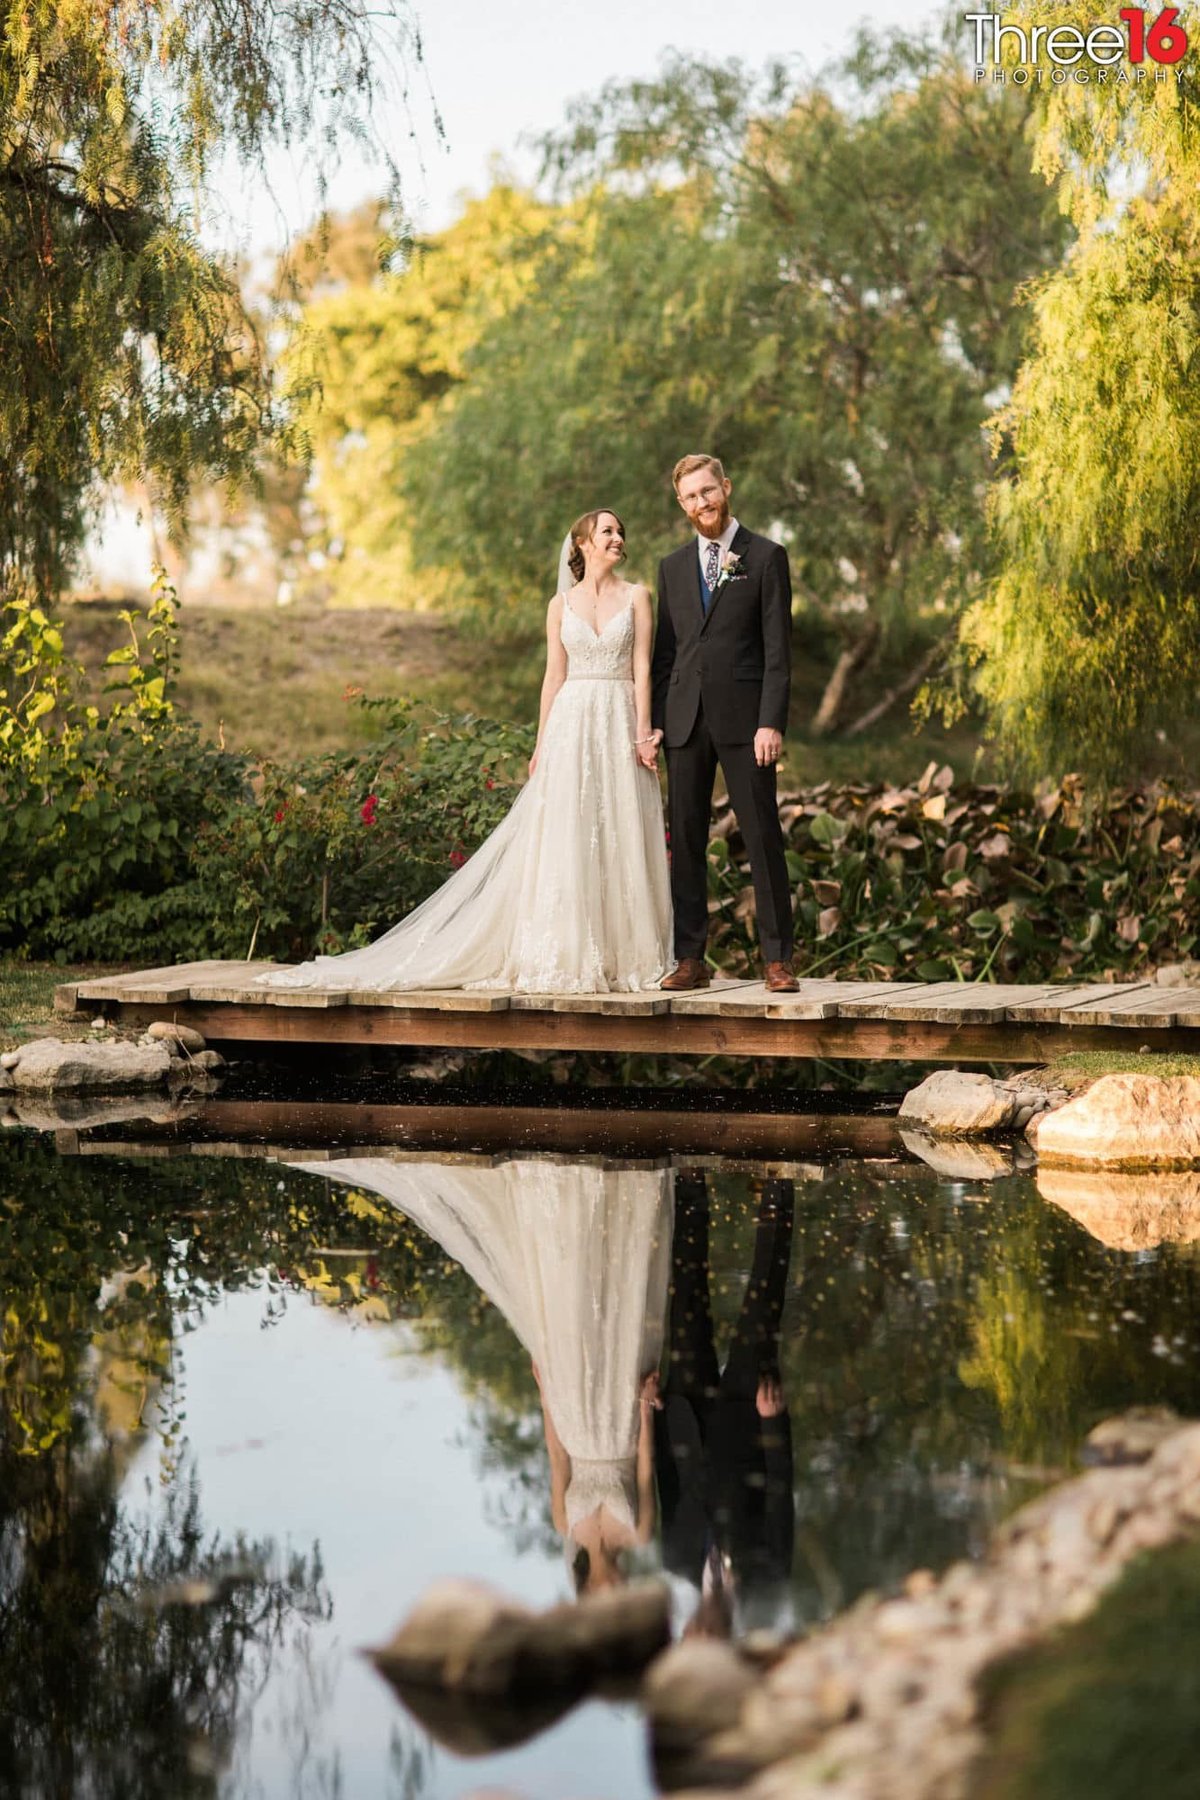 Bride and Groom stand together holding hands on a wooden bridge overlooking a small pond